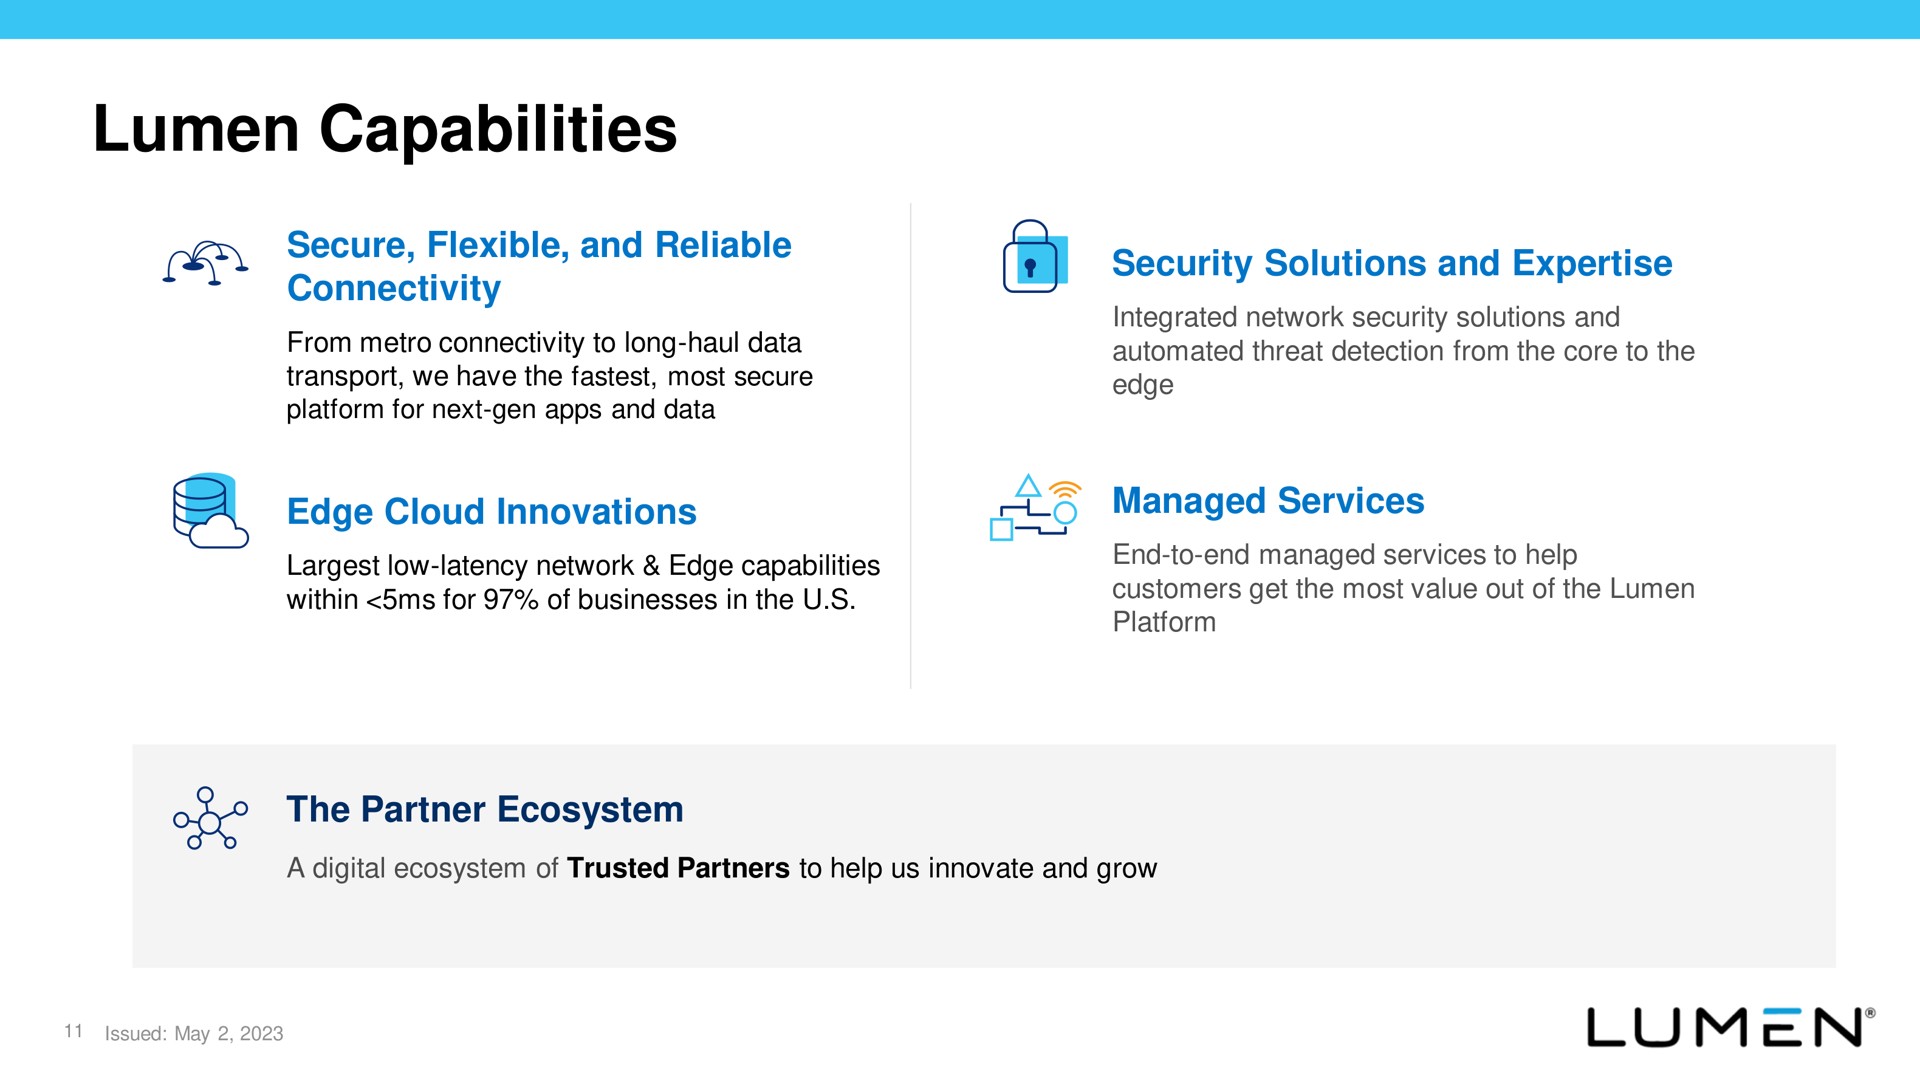 lumen capabilities secure flexible and reliable a edge cloud innovations security solutions and managed services the partner ecosystem | Lumen